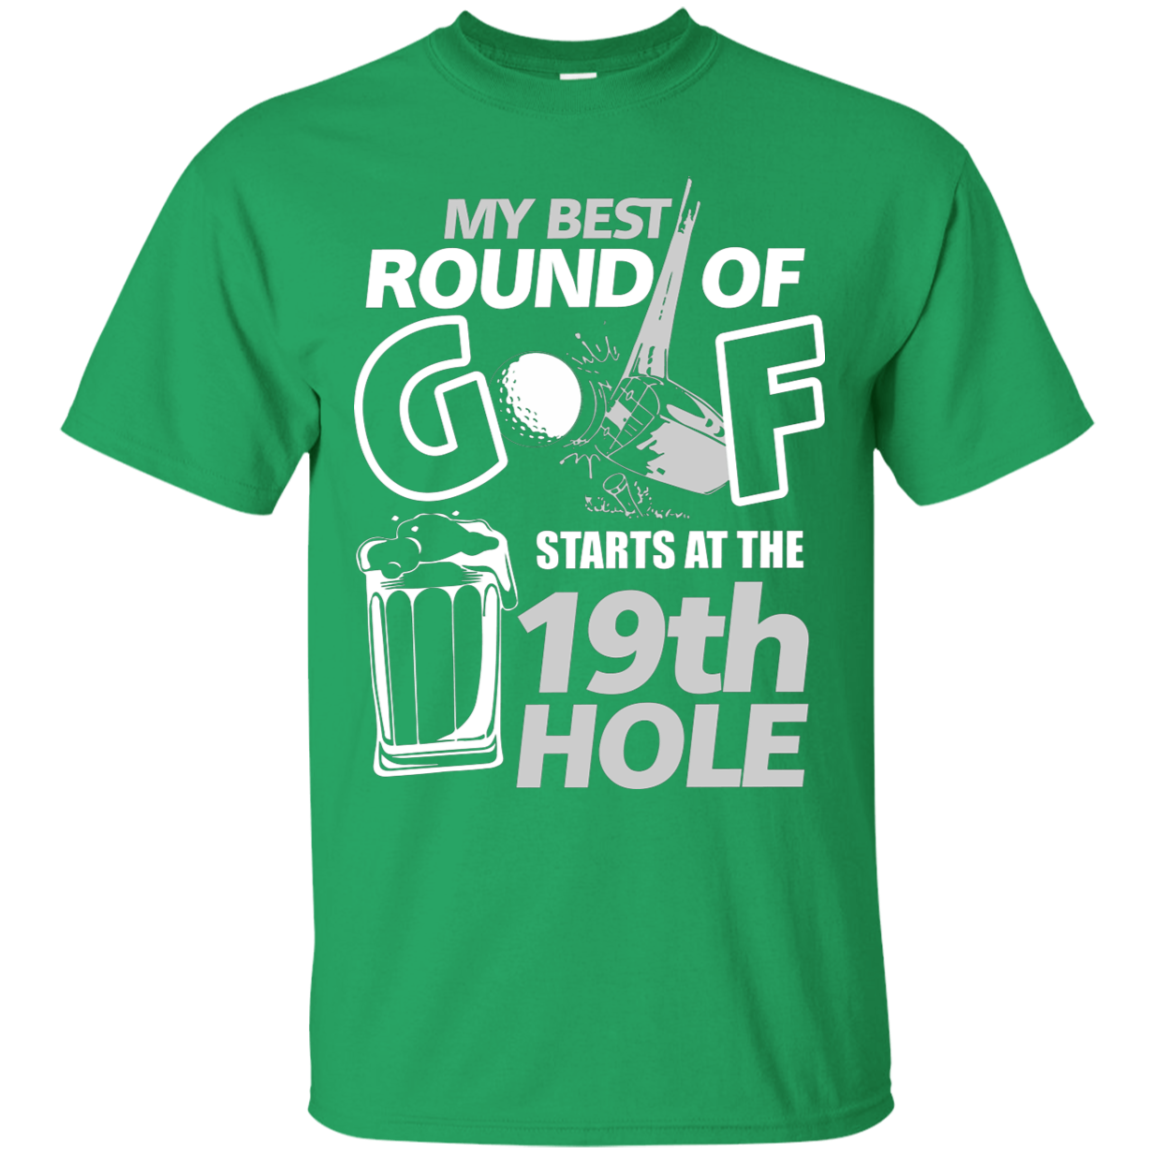 My Best Round Of Golf Starts At The 19th Hole v2.0 T-Shirt Apparel - The Beer Lodge